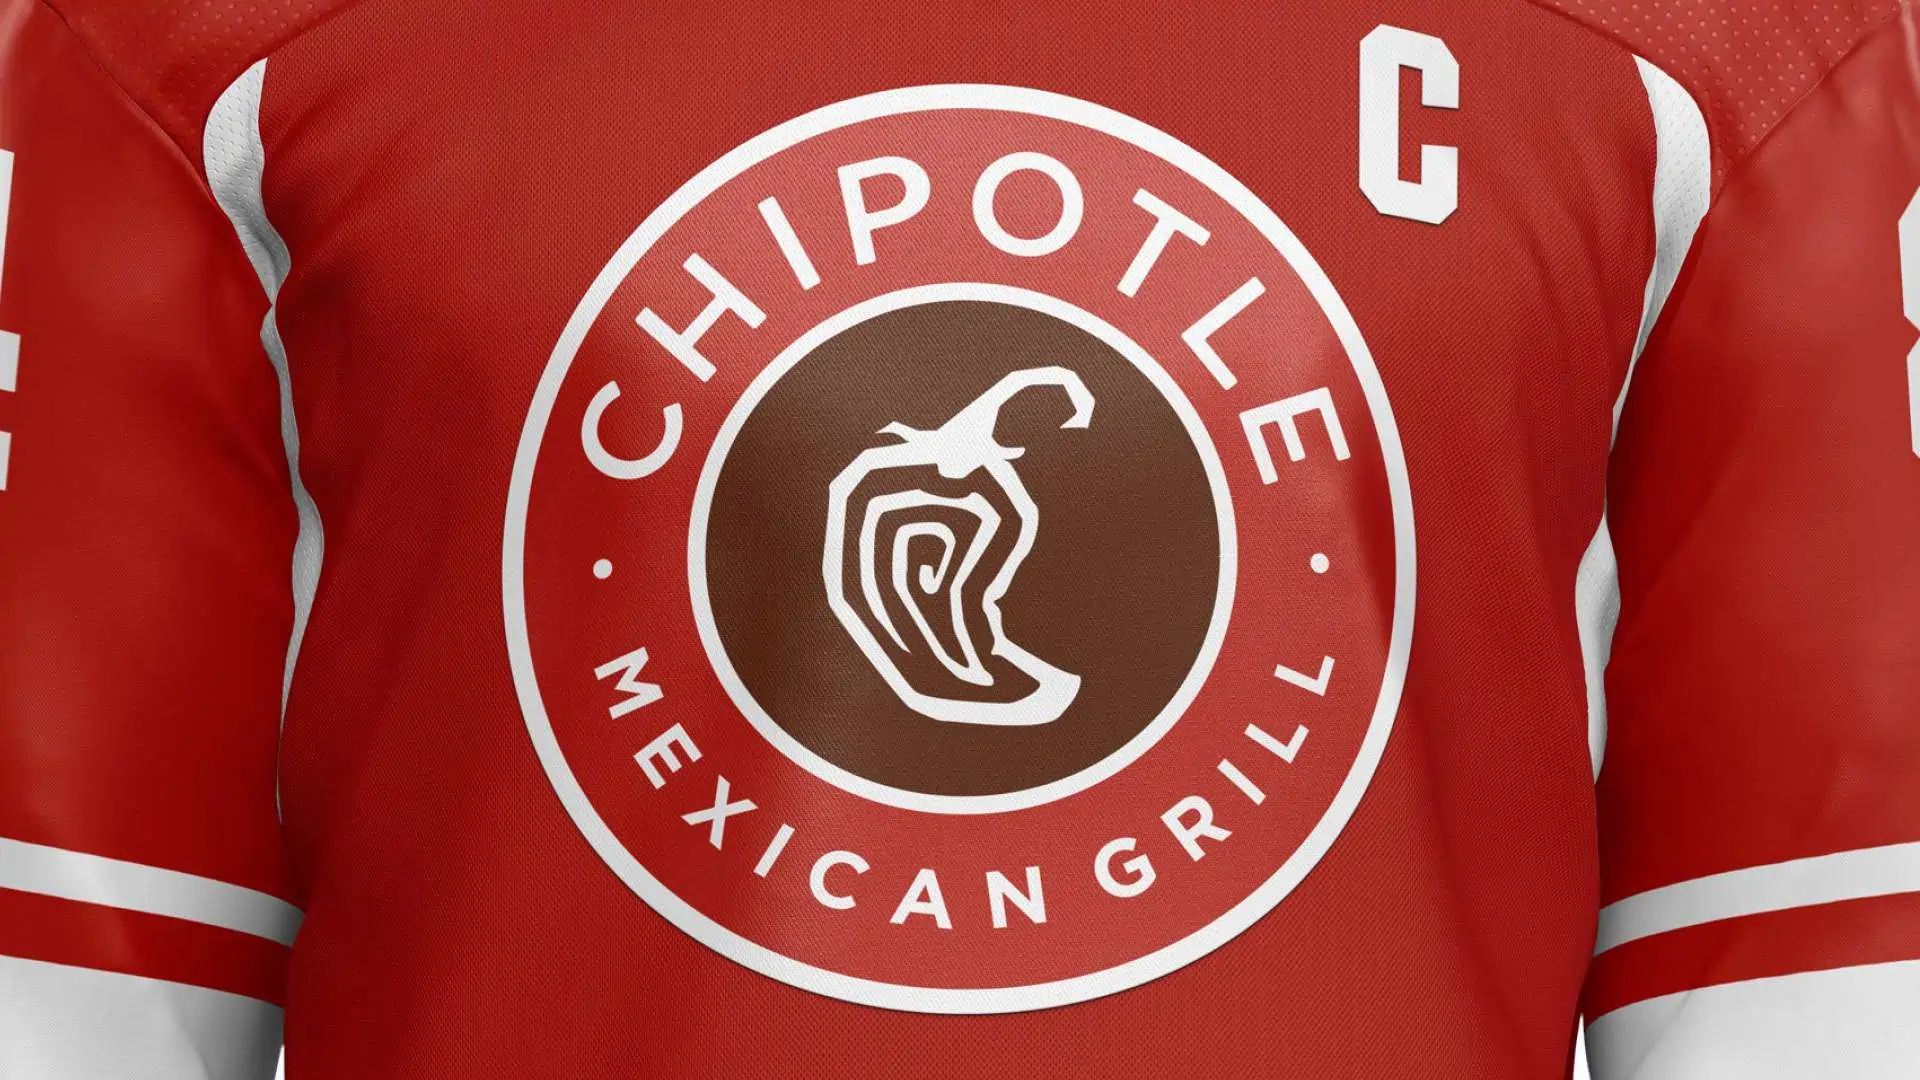 Wear your hockey jersey to Chipotle for free food